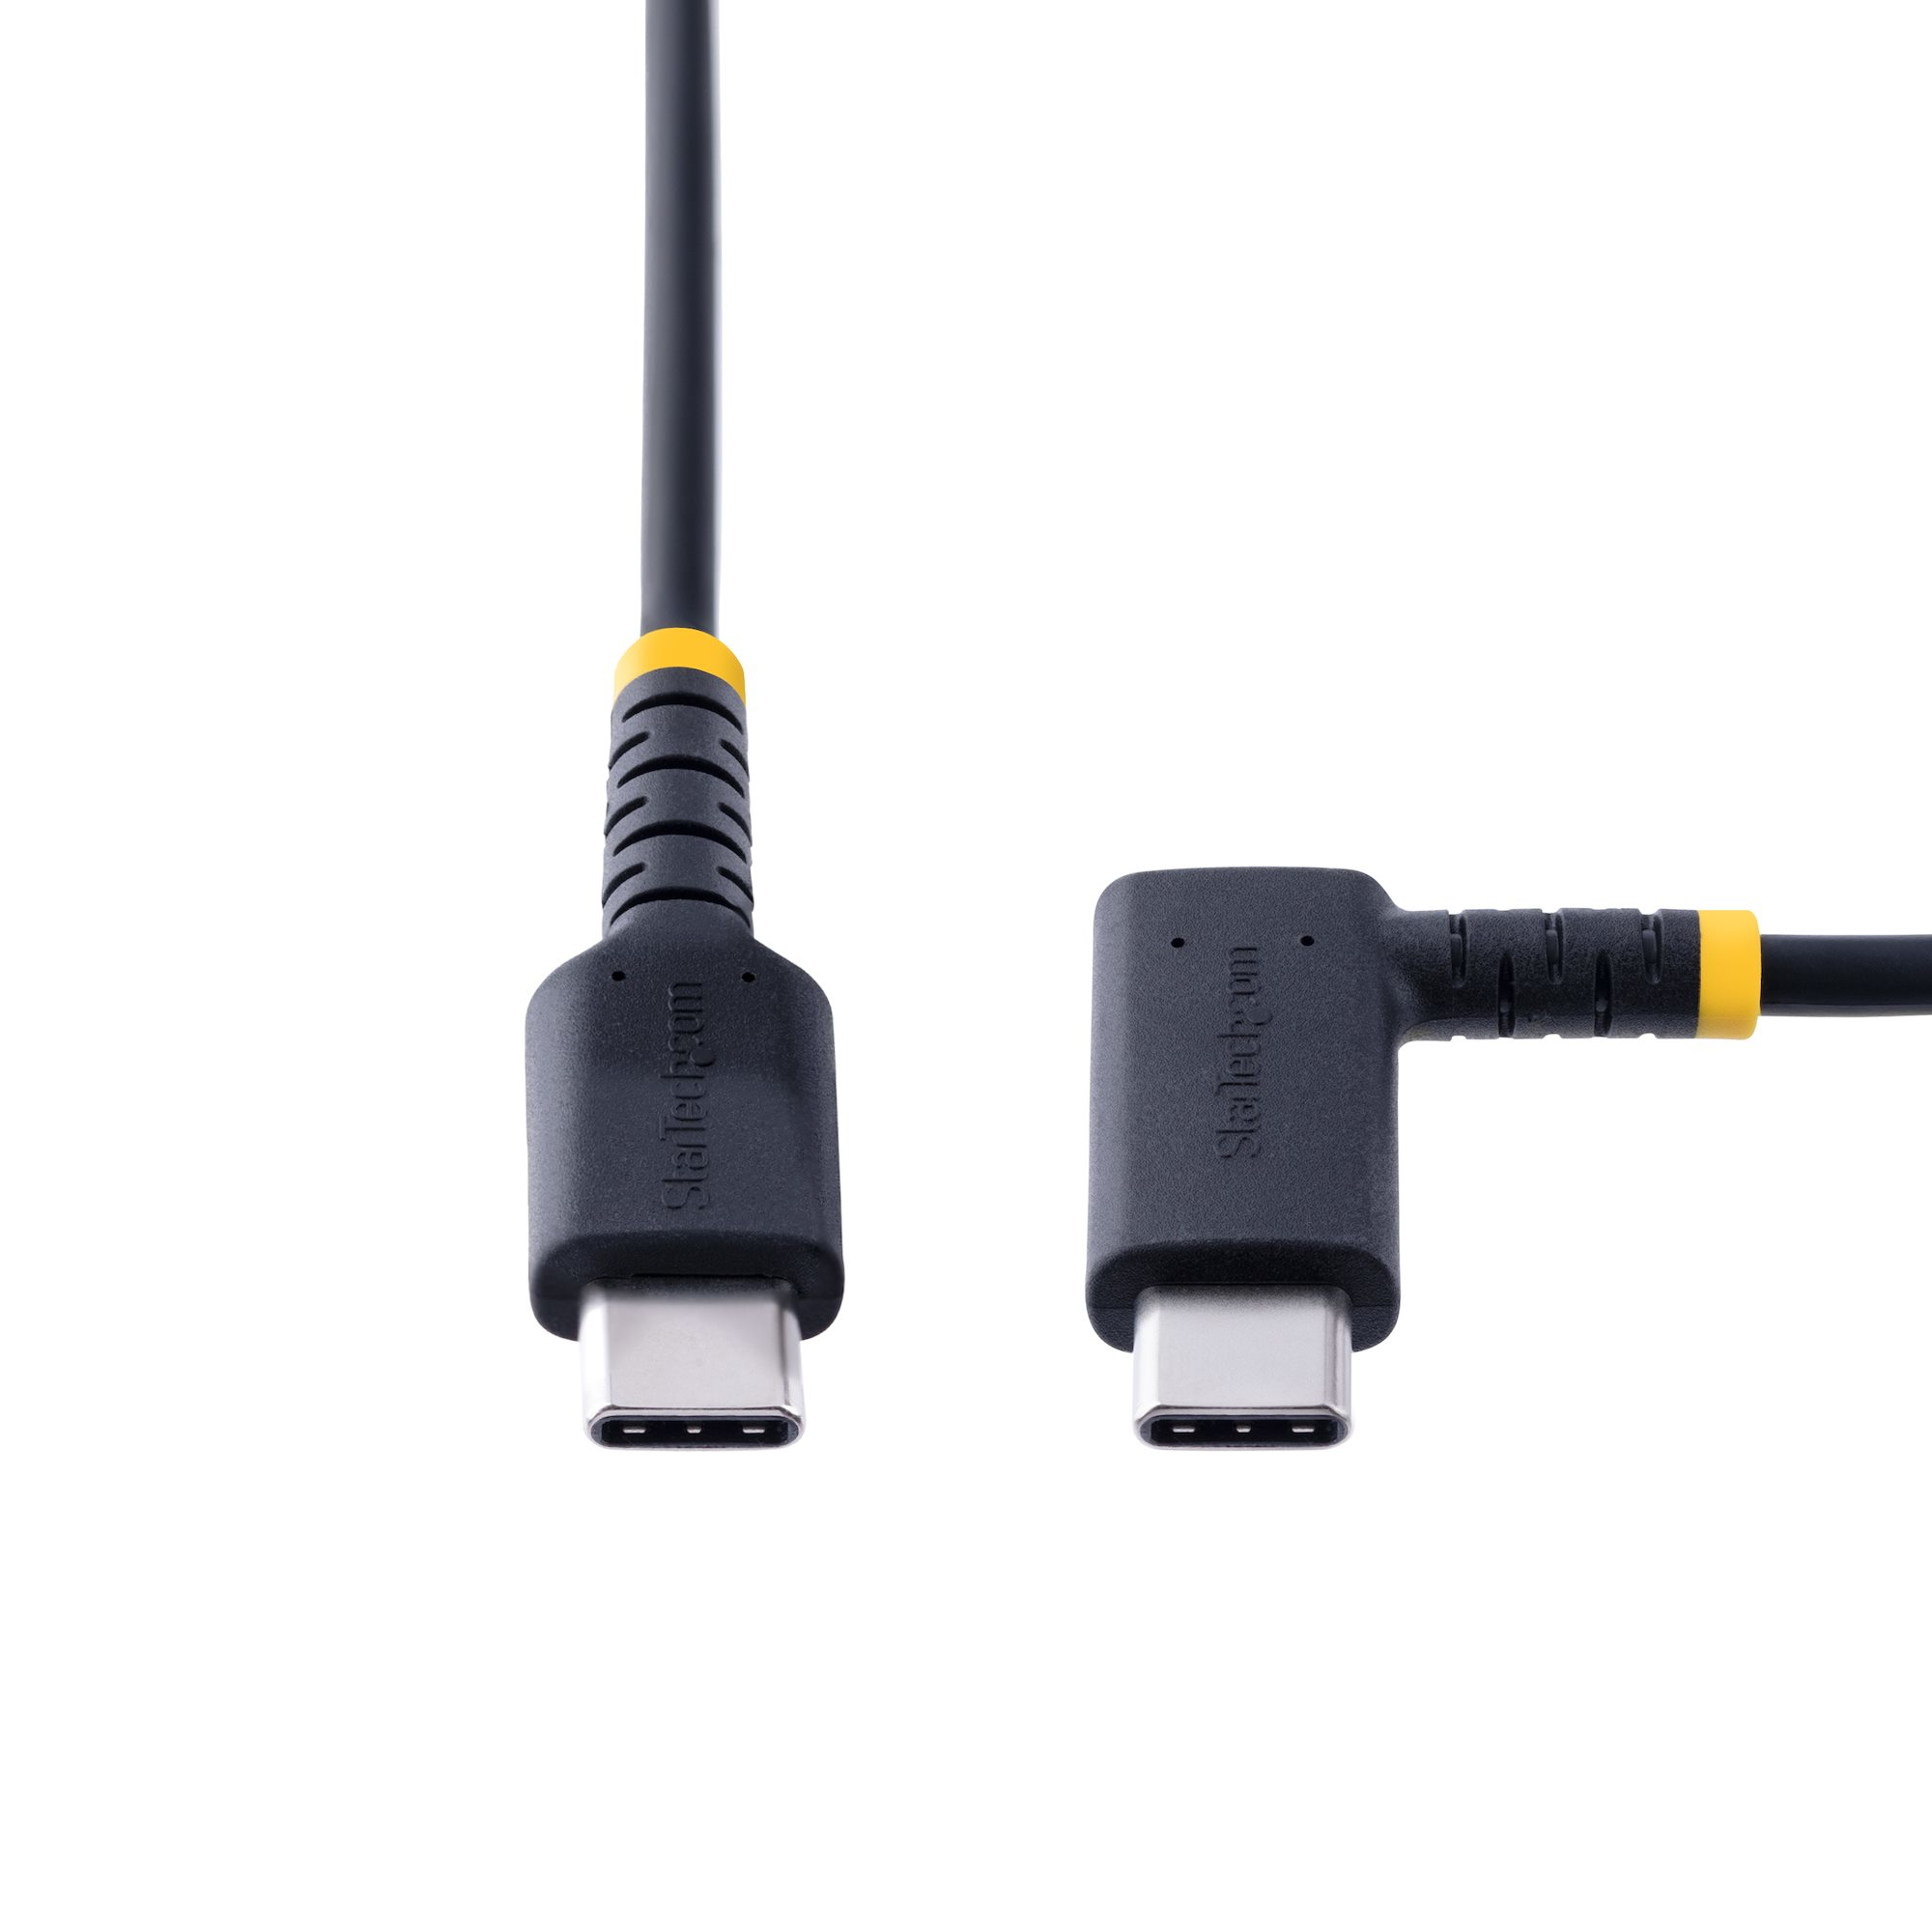 2.0 USB-A to USB-C Charging Cable (USB-C Cable)